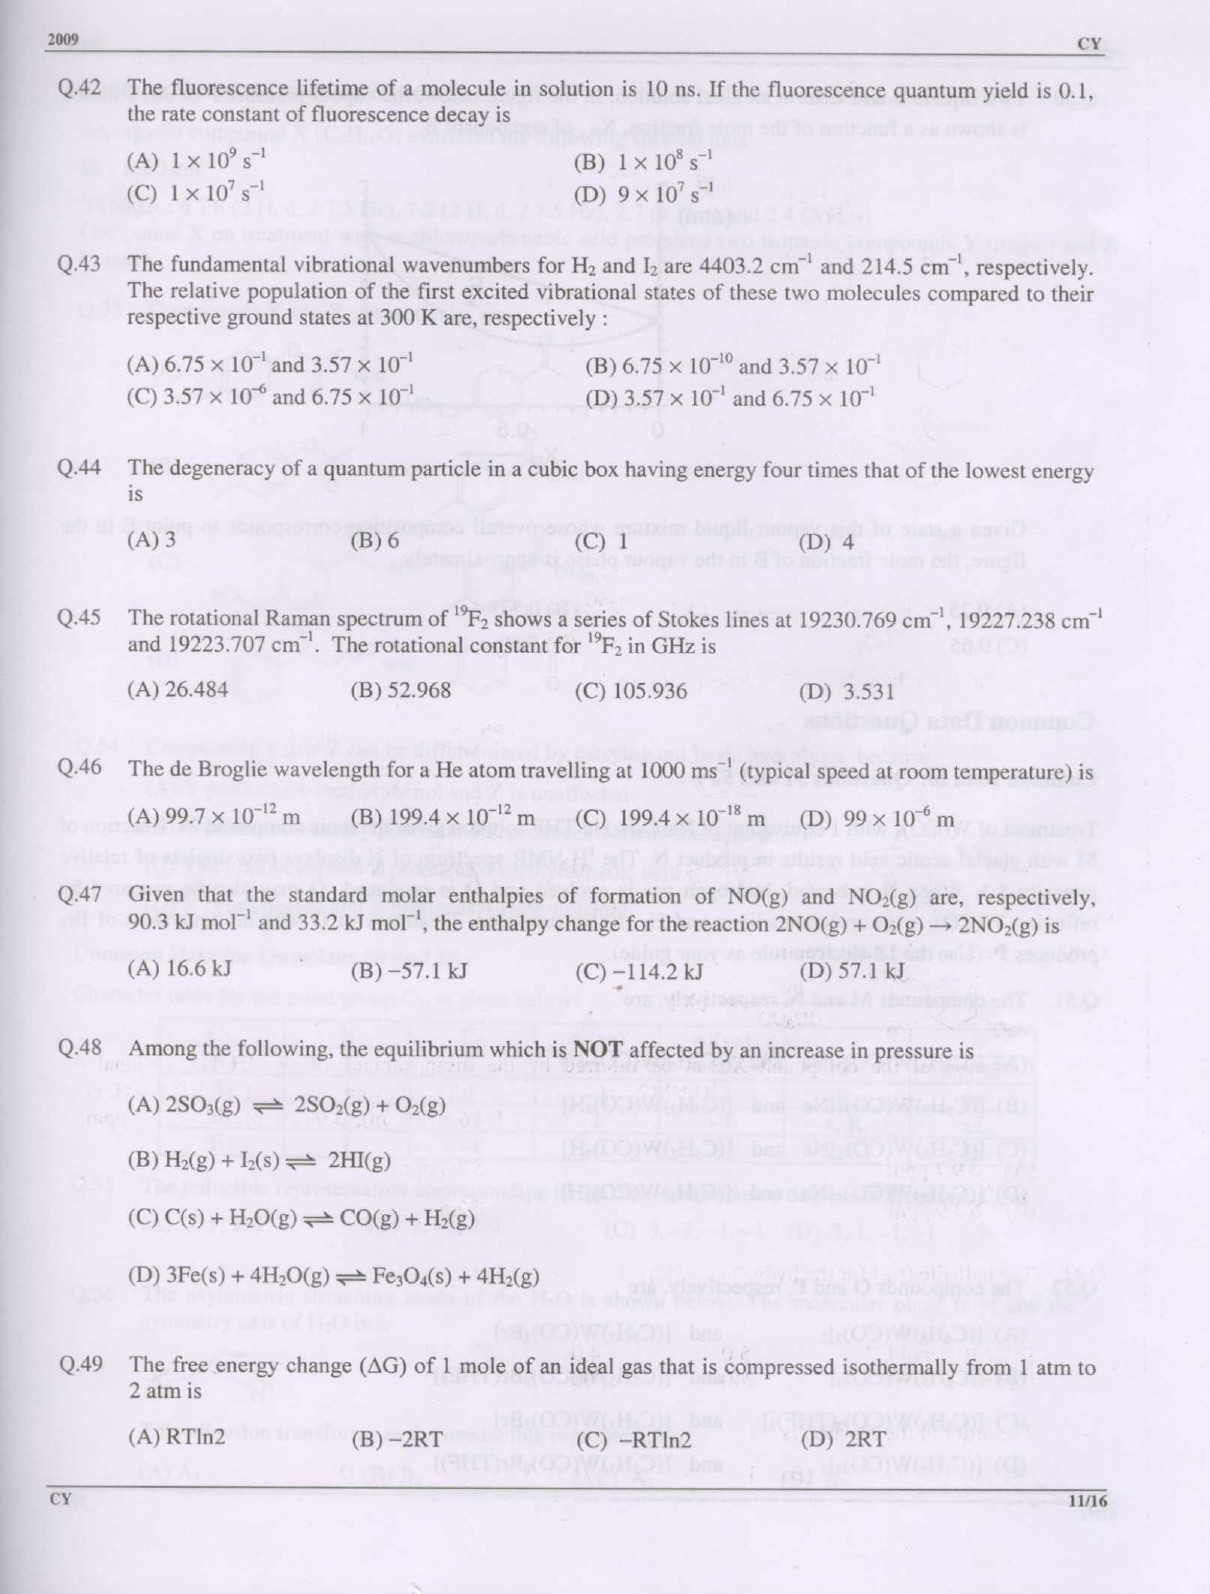 GATE Exam Question Paper 2009 Chemistry 11